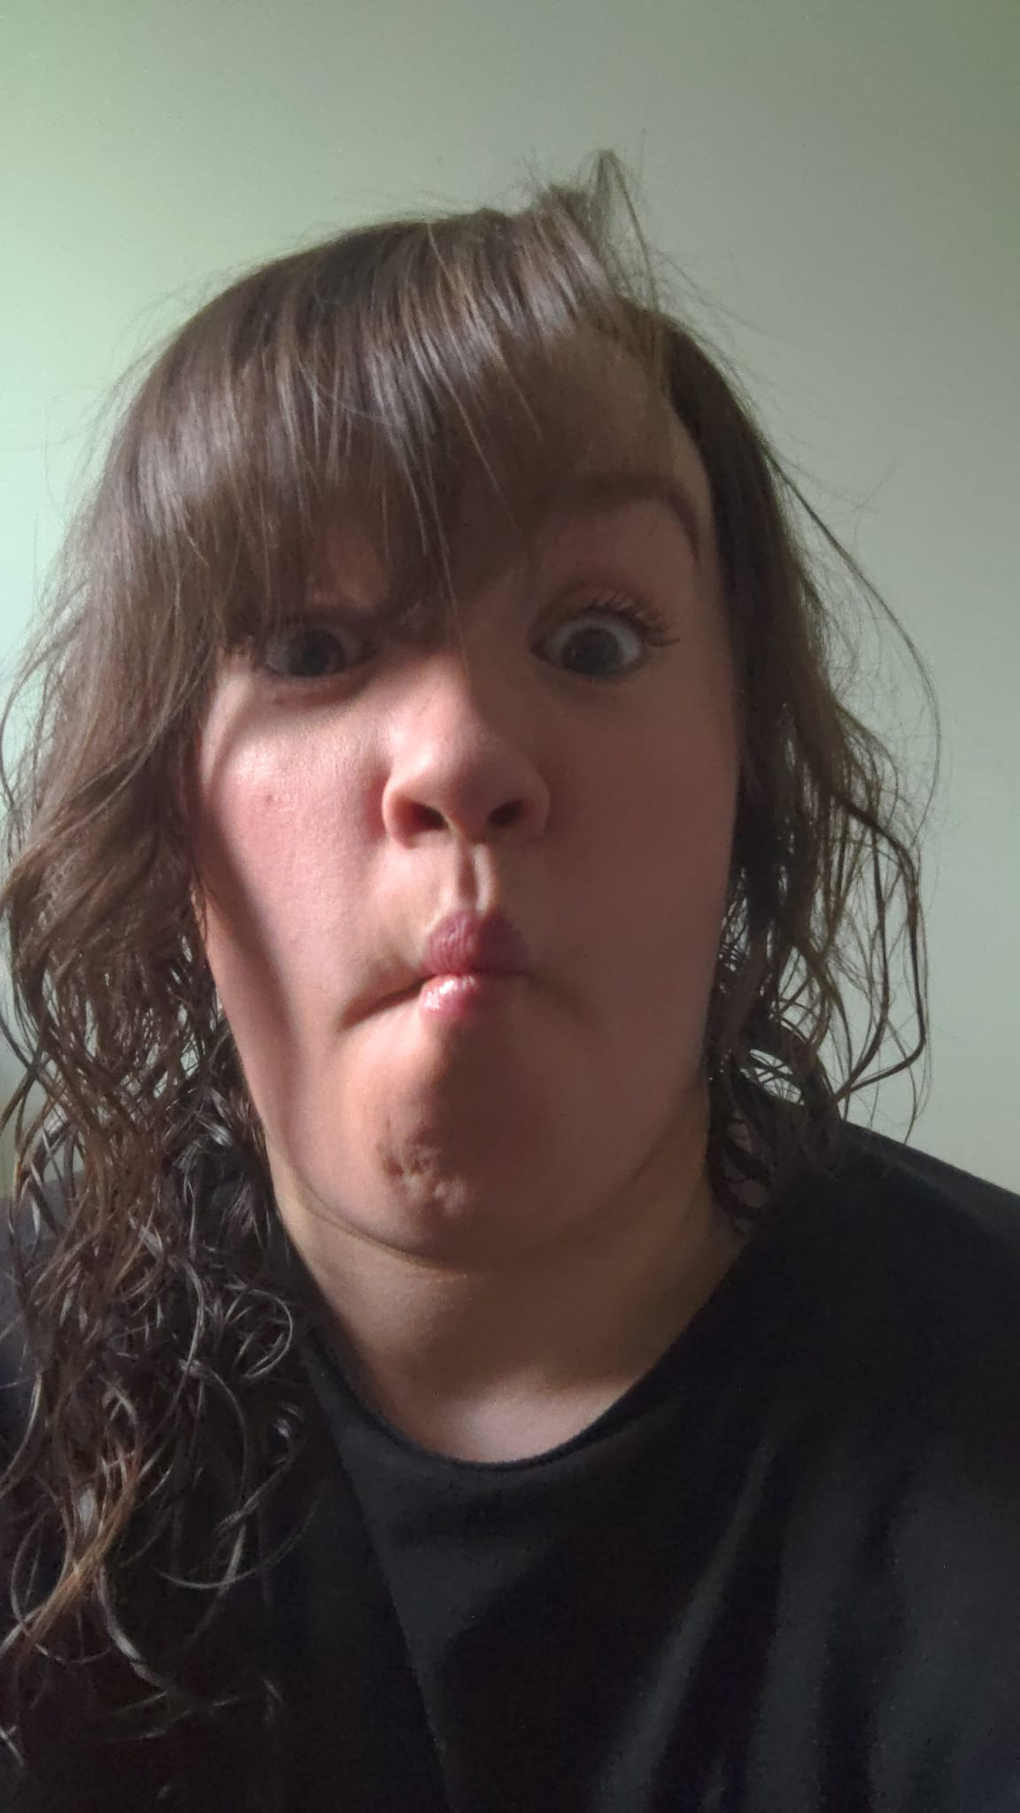 Anna pulling a face by sucking in her cheeks